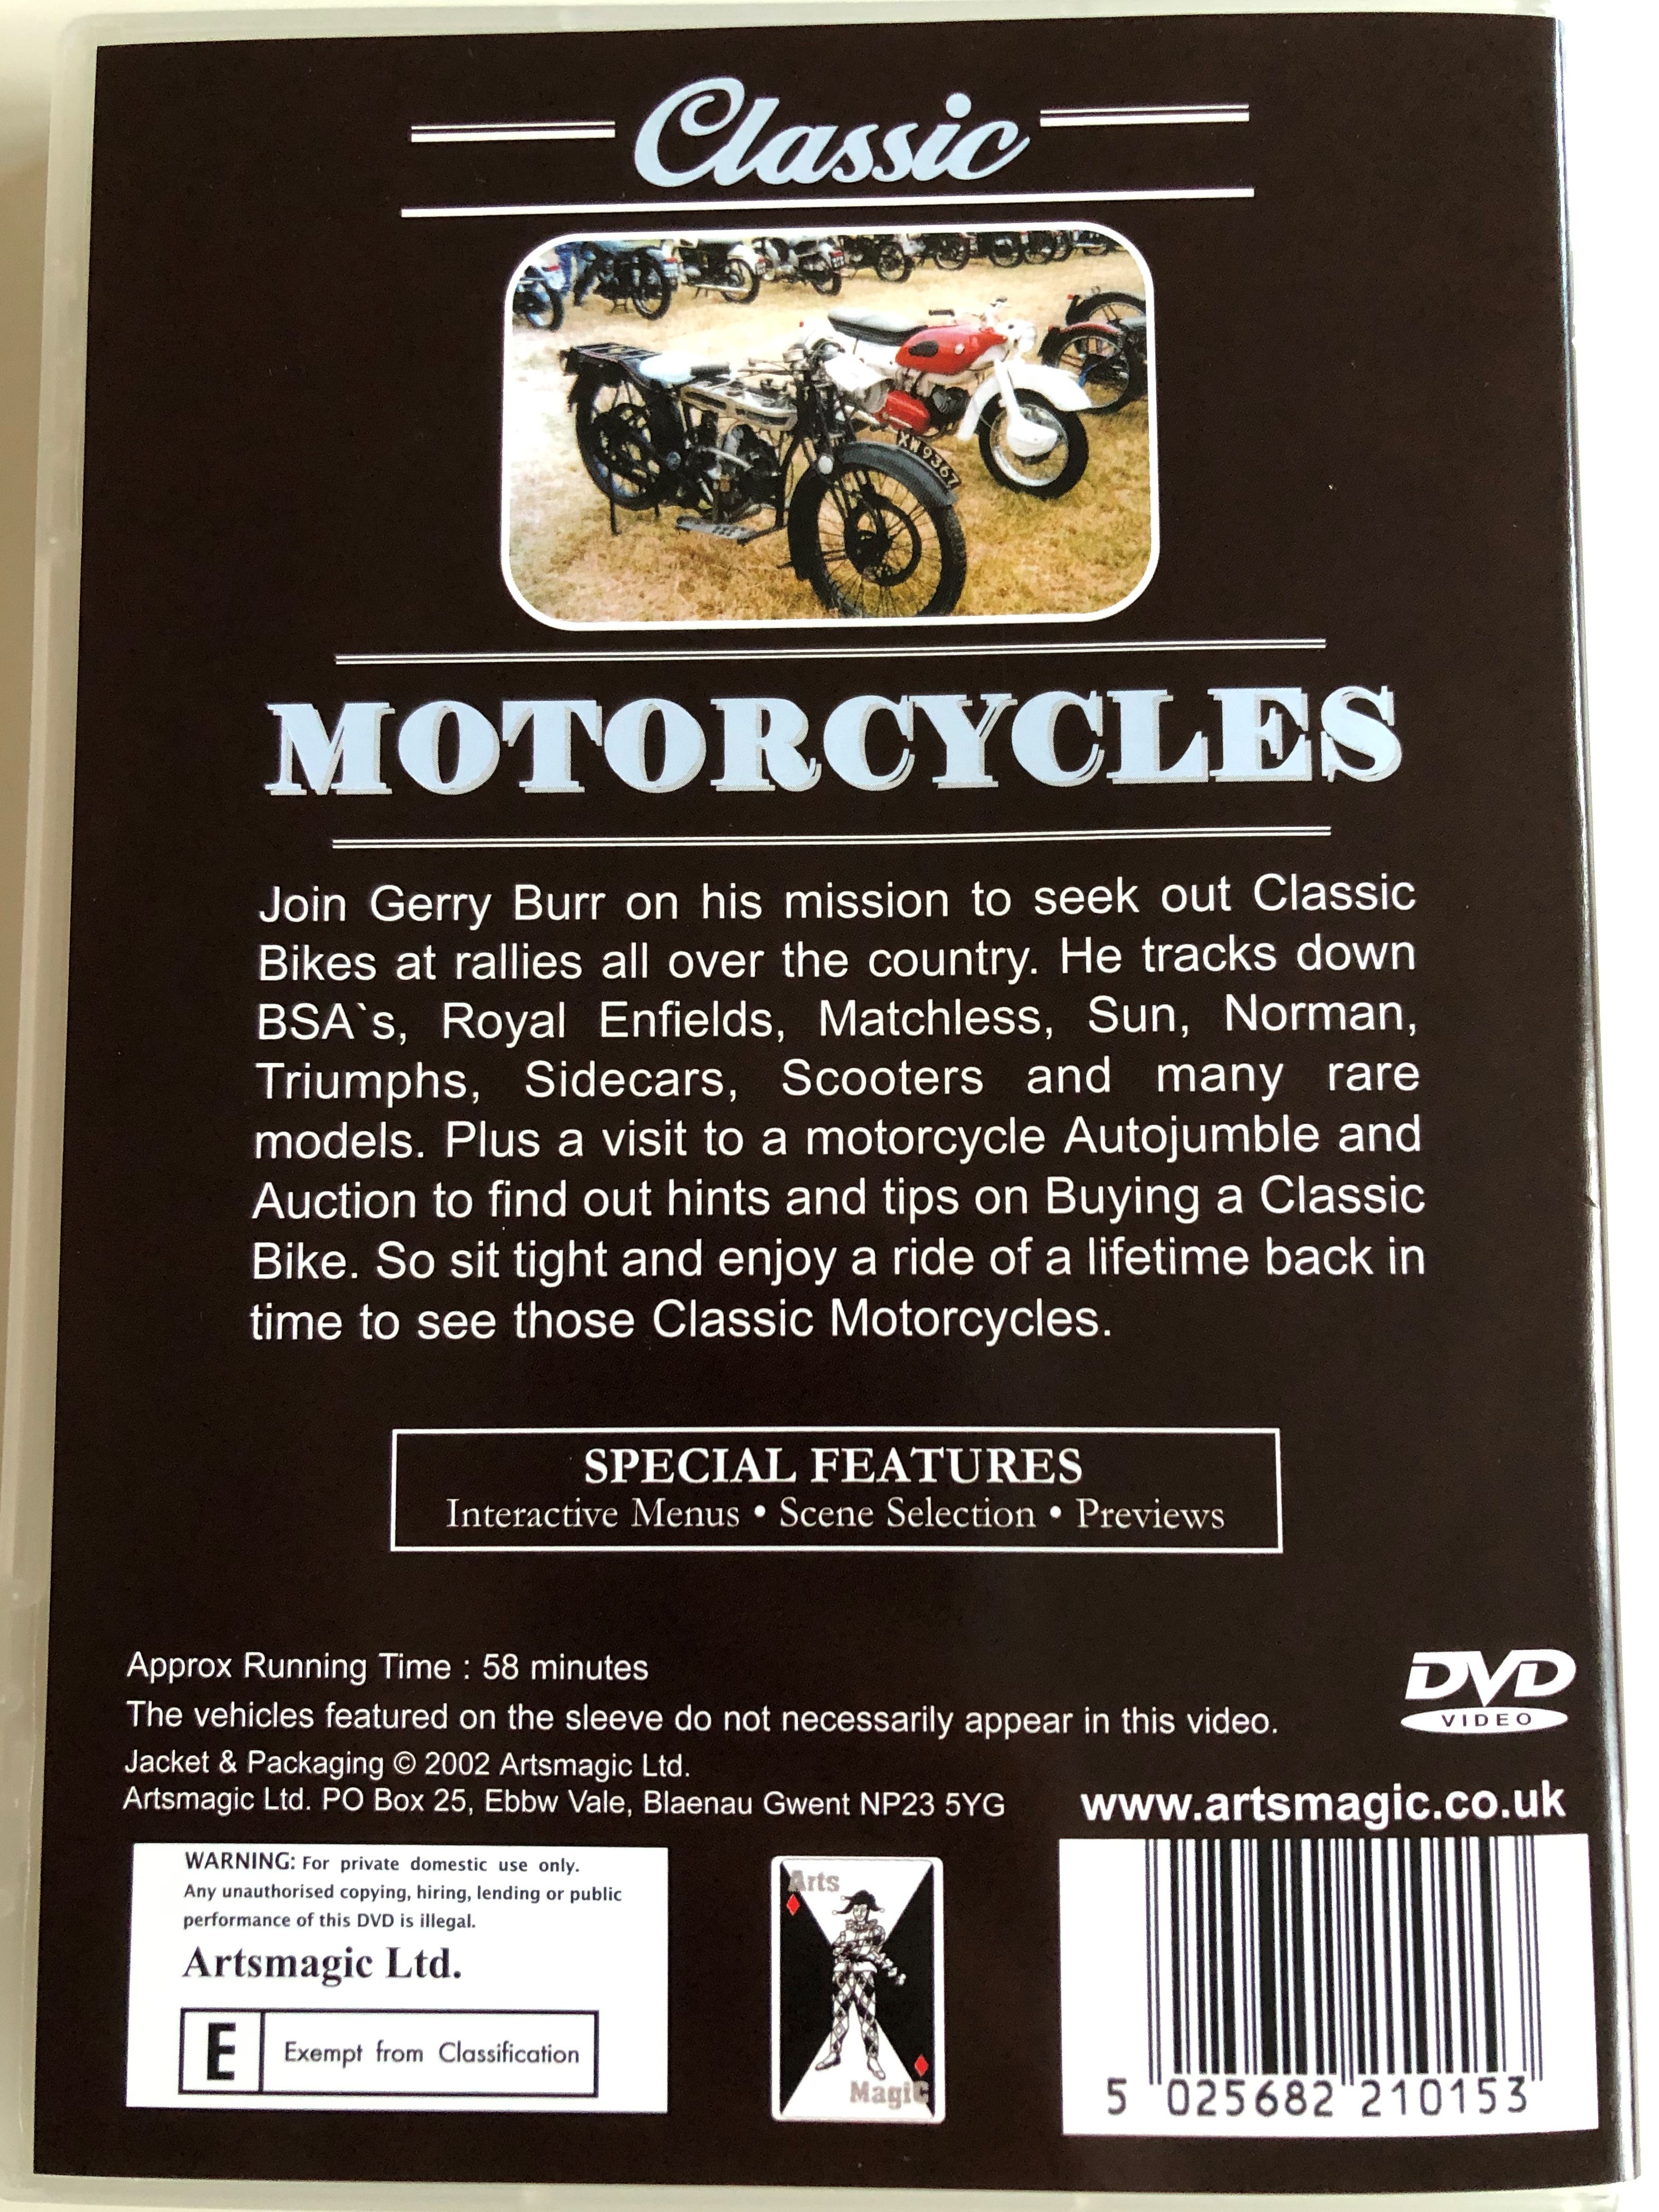 classic-motorcycles-dvd-presented-by-gerry-burr-2.jpg